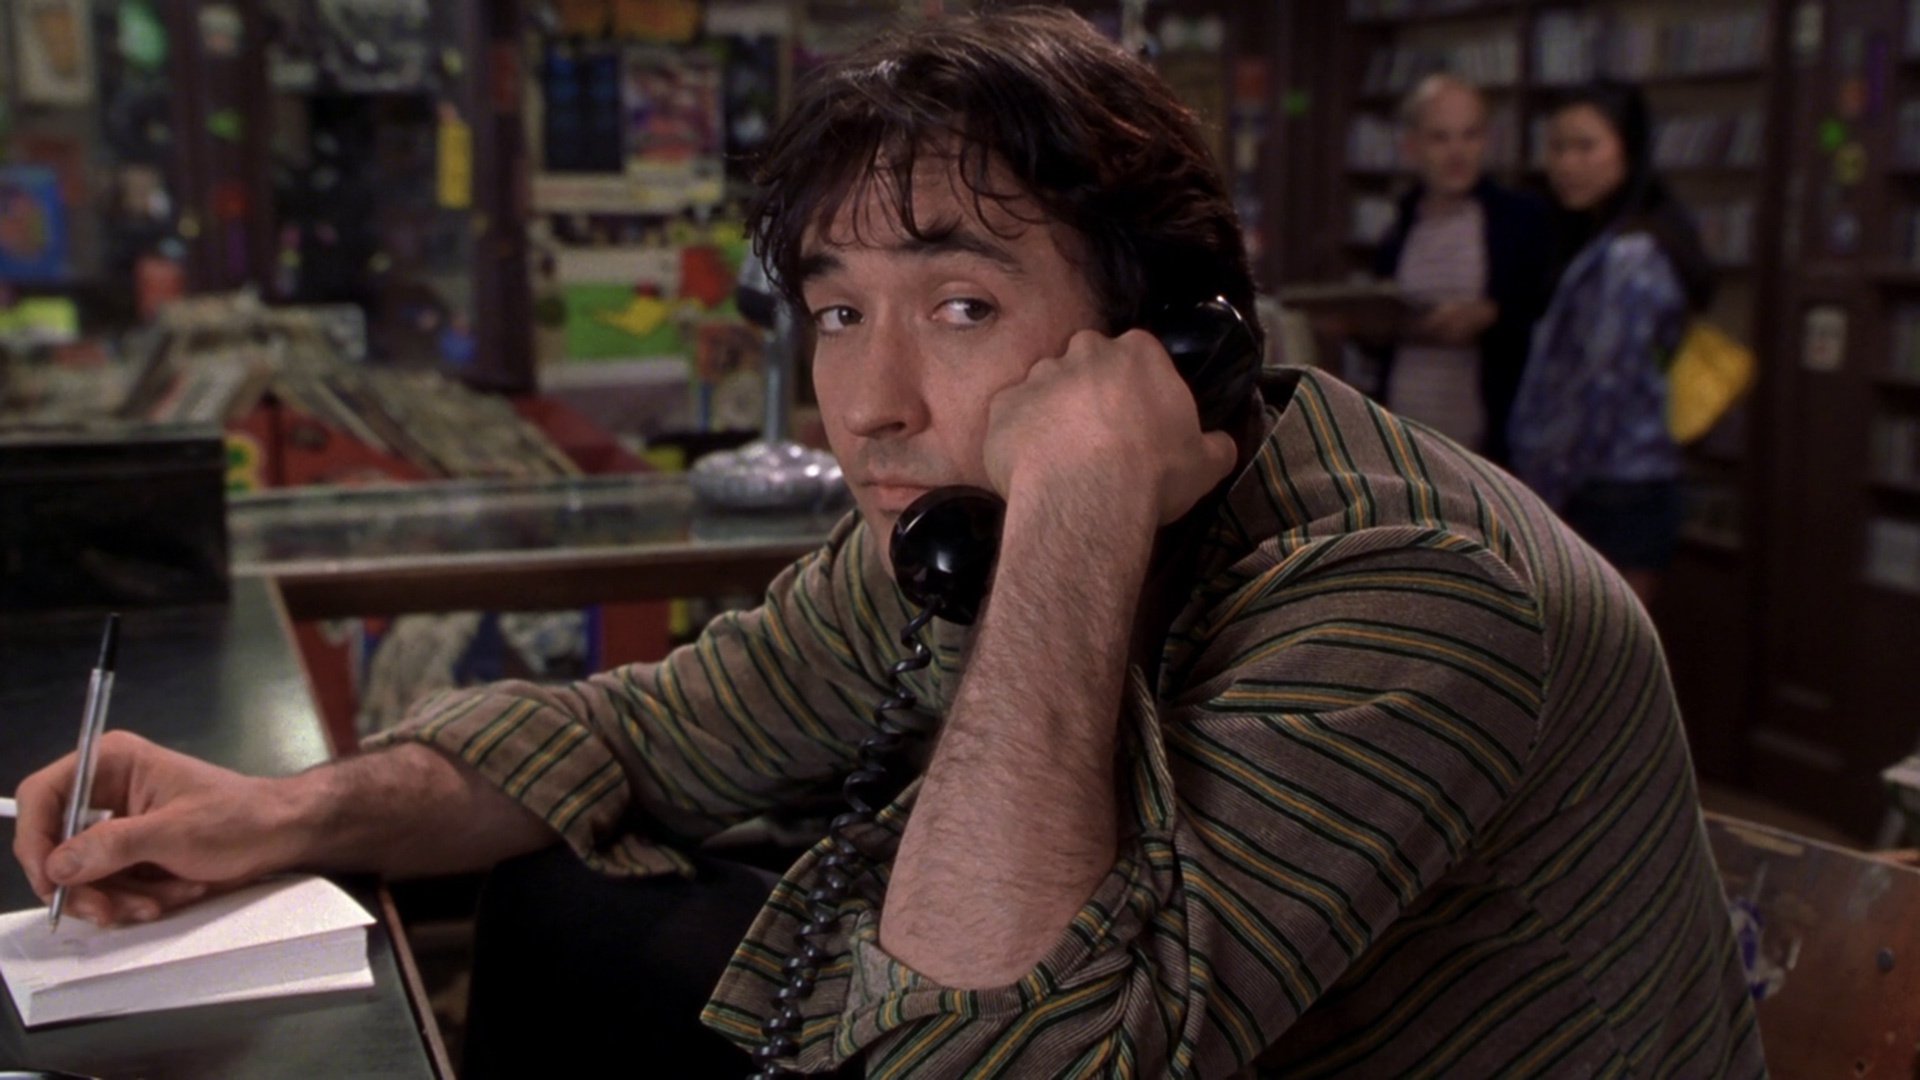 High Fidelity Soundtrack Music - Complete Song List | Tunefind